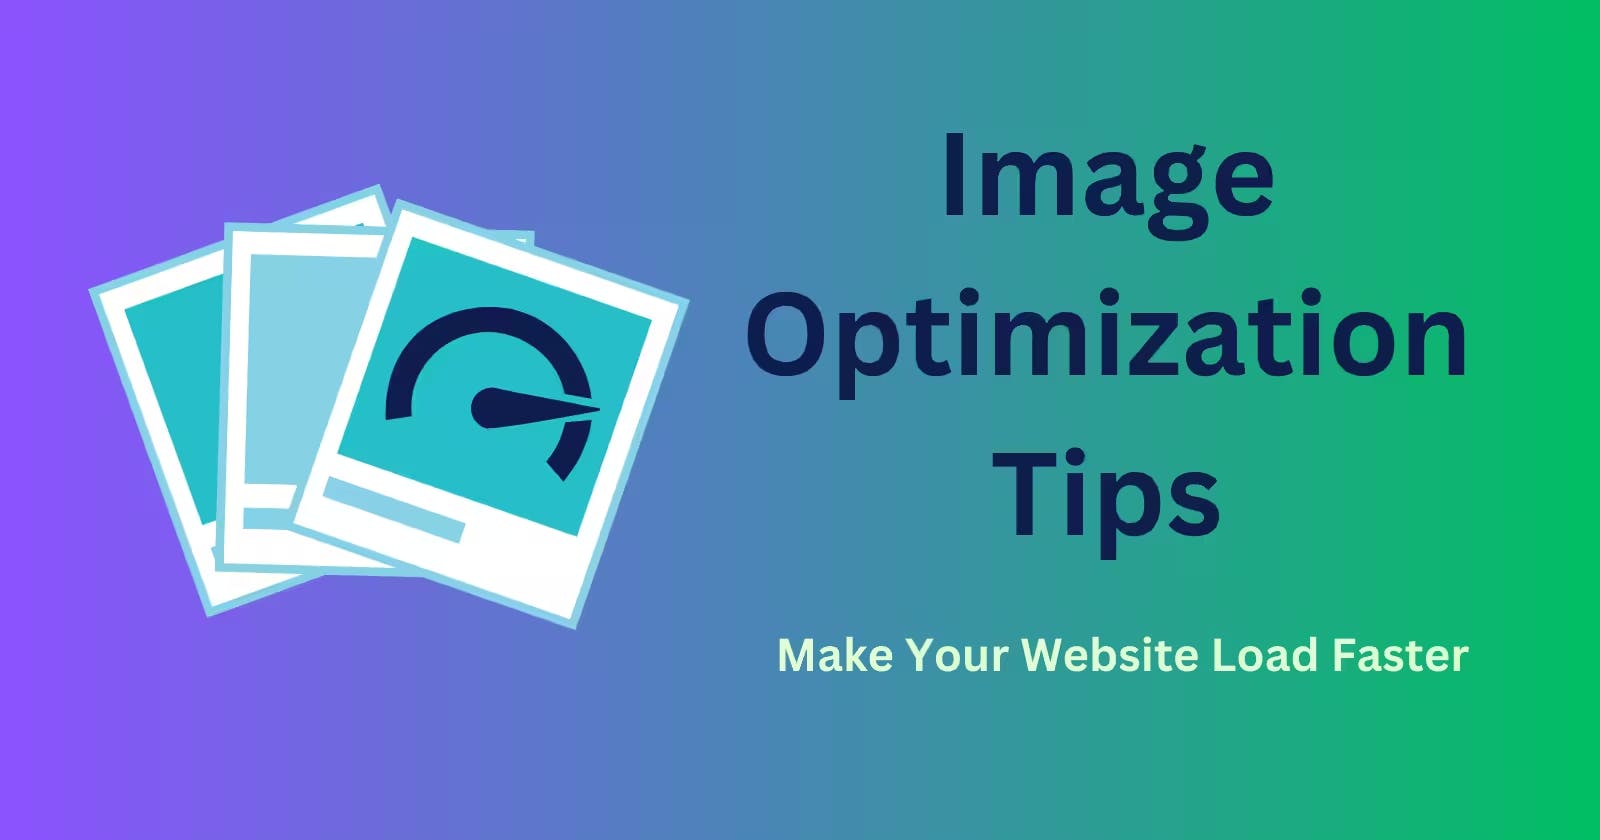 Say Goodbye to Slow Websites! Try These 6 Image Optimization Tips Today